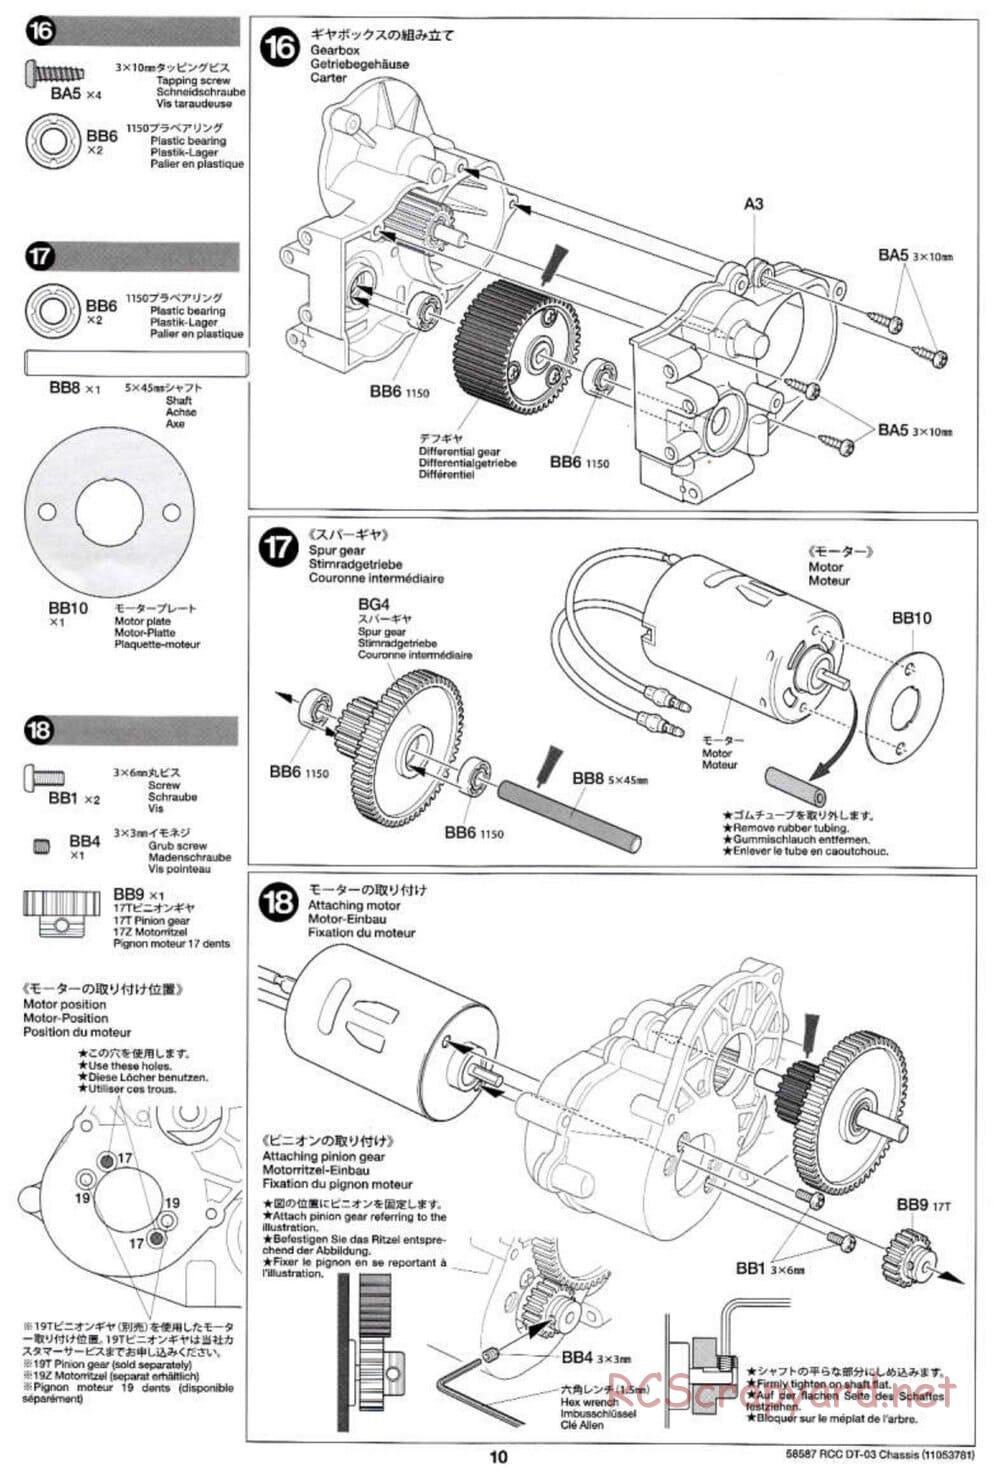 Tamiya - Neo Fighter Buggy Chassis - Manual - Page 10